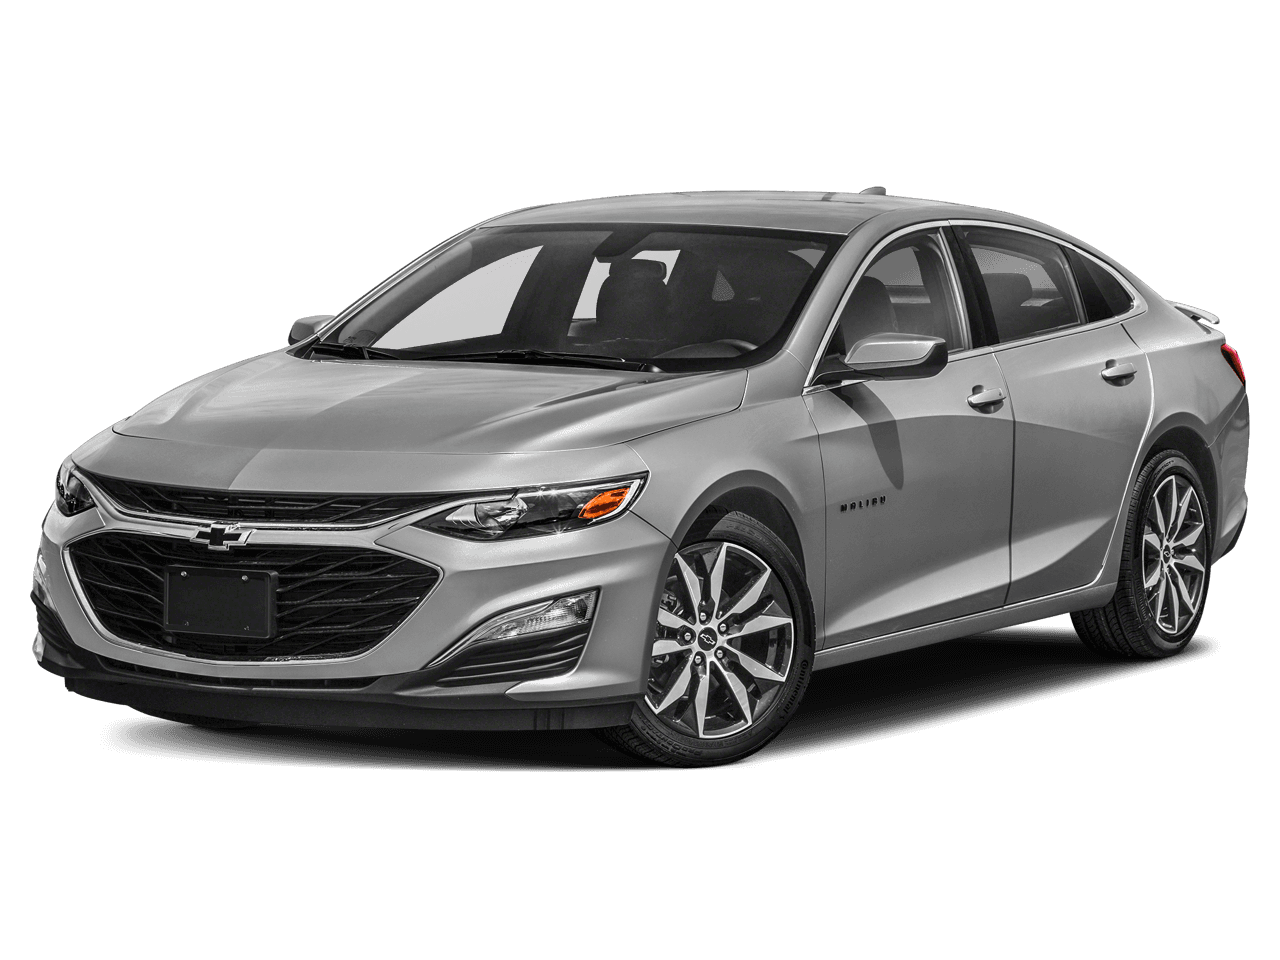 2020 Chevrolet Malibu Photo in Wooster, OH 44691